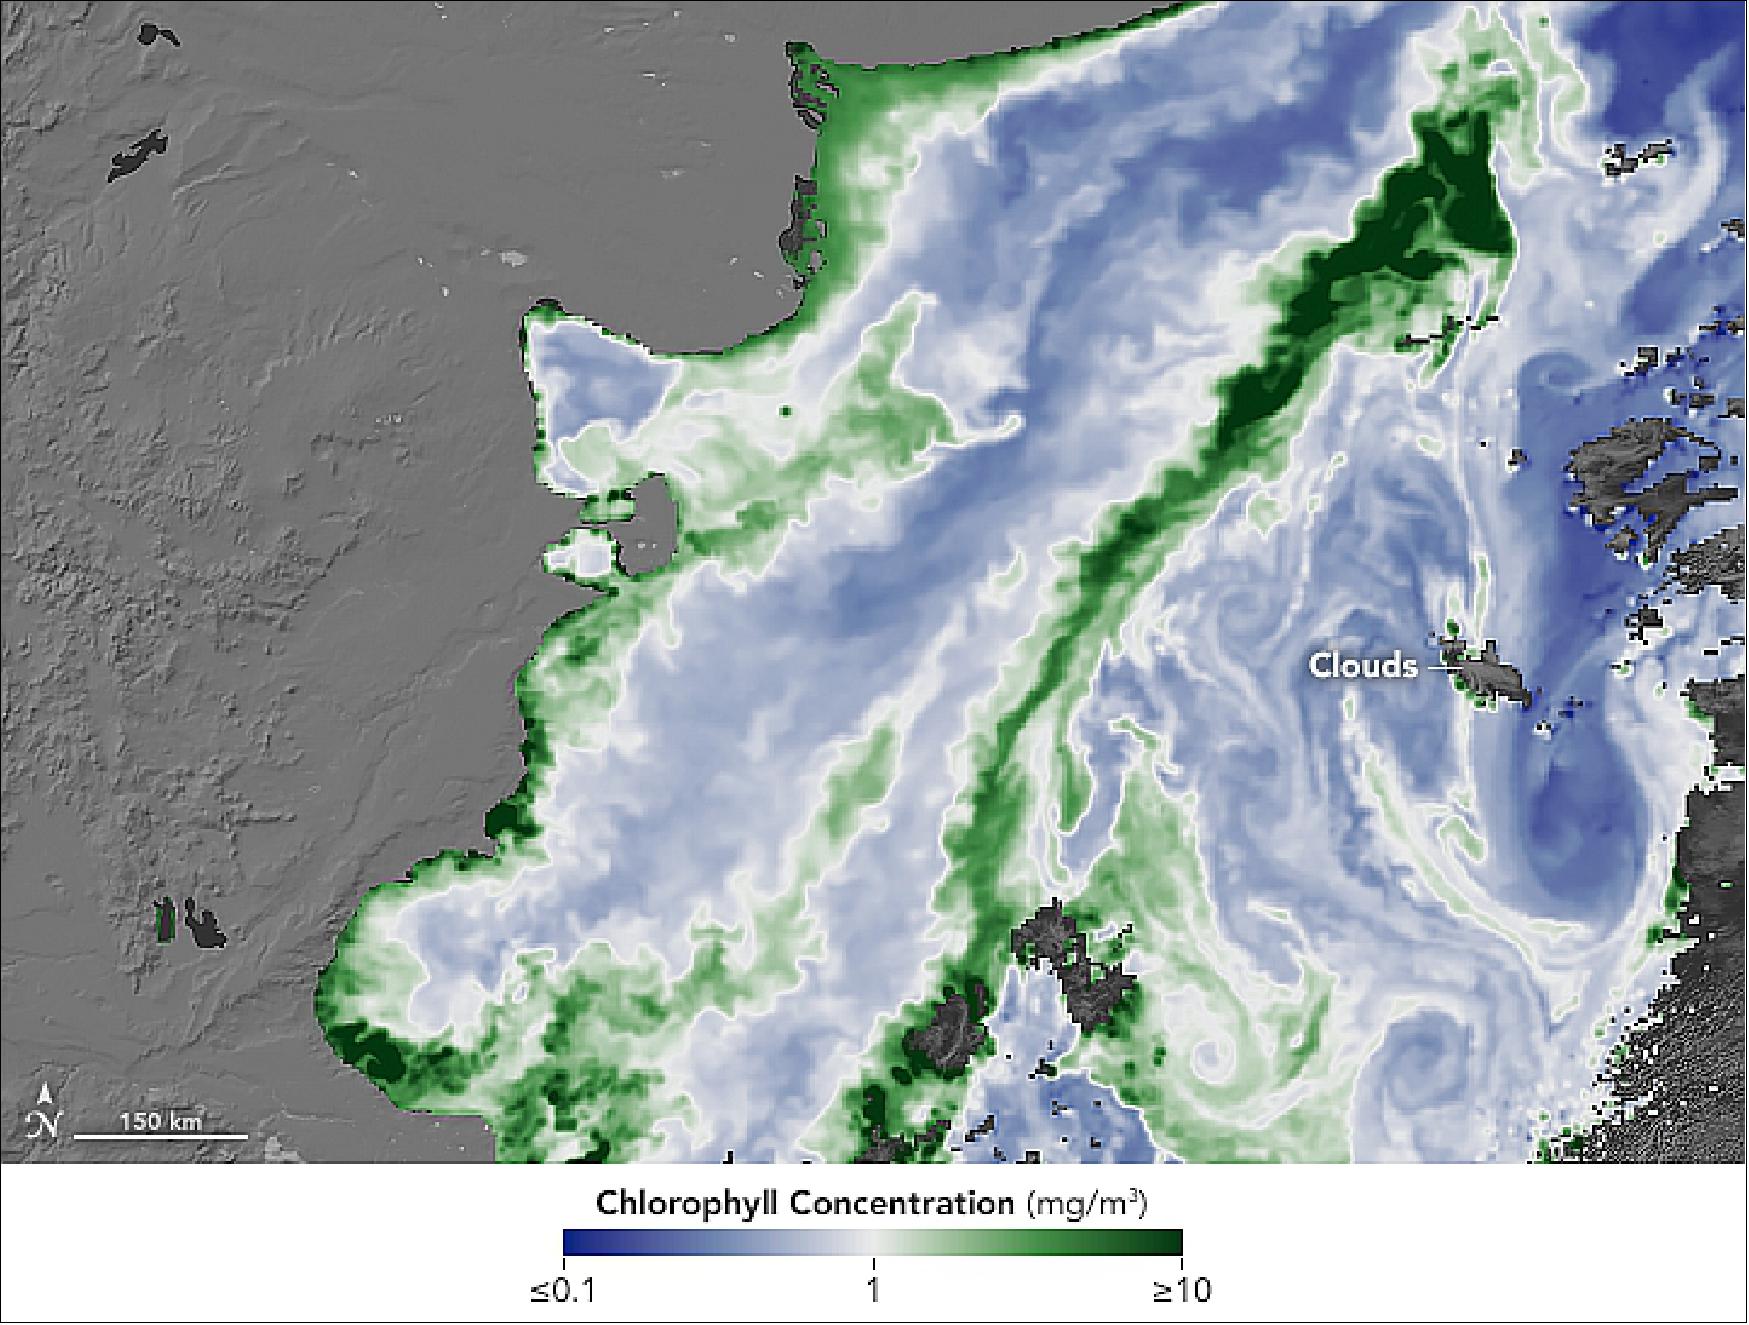 Figure 34: This MODIS image shows concentrations of chlorophyll–a, the primary pigment used by phytoplankton to capture sunlight. The darkest shades of green shown areas with the greatest chlorophyll concentrations. MODIS can see what is opaque to our eyes because it detects a range of visible light, infrared, and near-infrared wavelengths, and because scientists have spent decades refining their tools for spotting the chlorophyll signal amidst the noise of the ocean and atmosphere (image credit: NASA Earth Observatory, images by Joshua Stevens and Robert Simmon, using MODIS data from NASA's Ocean Color Web, Story by Michael Carlowicz)